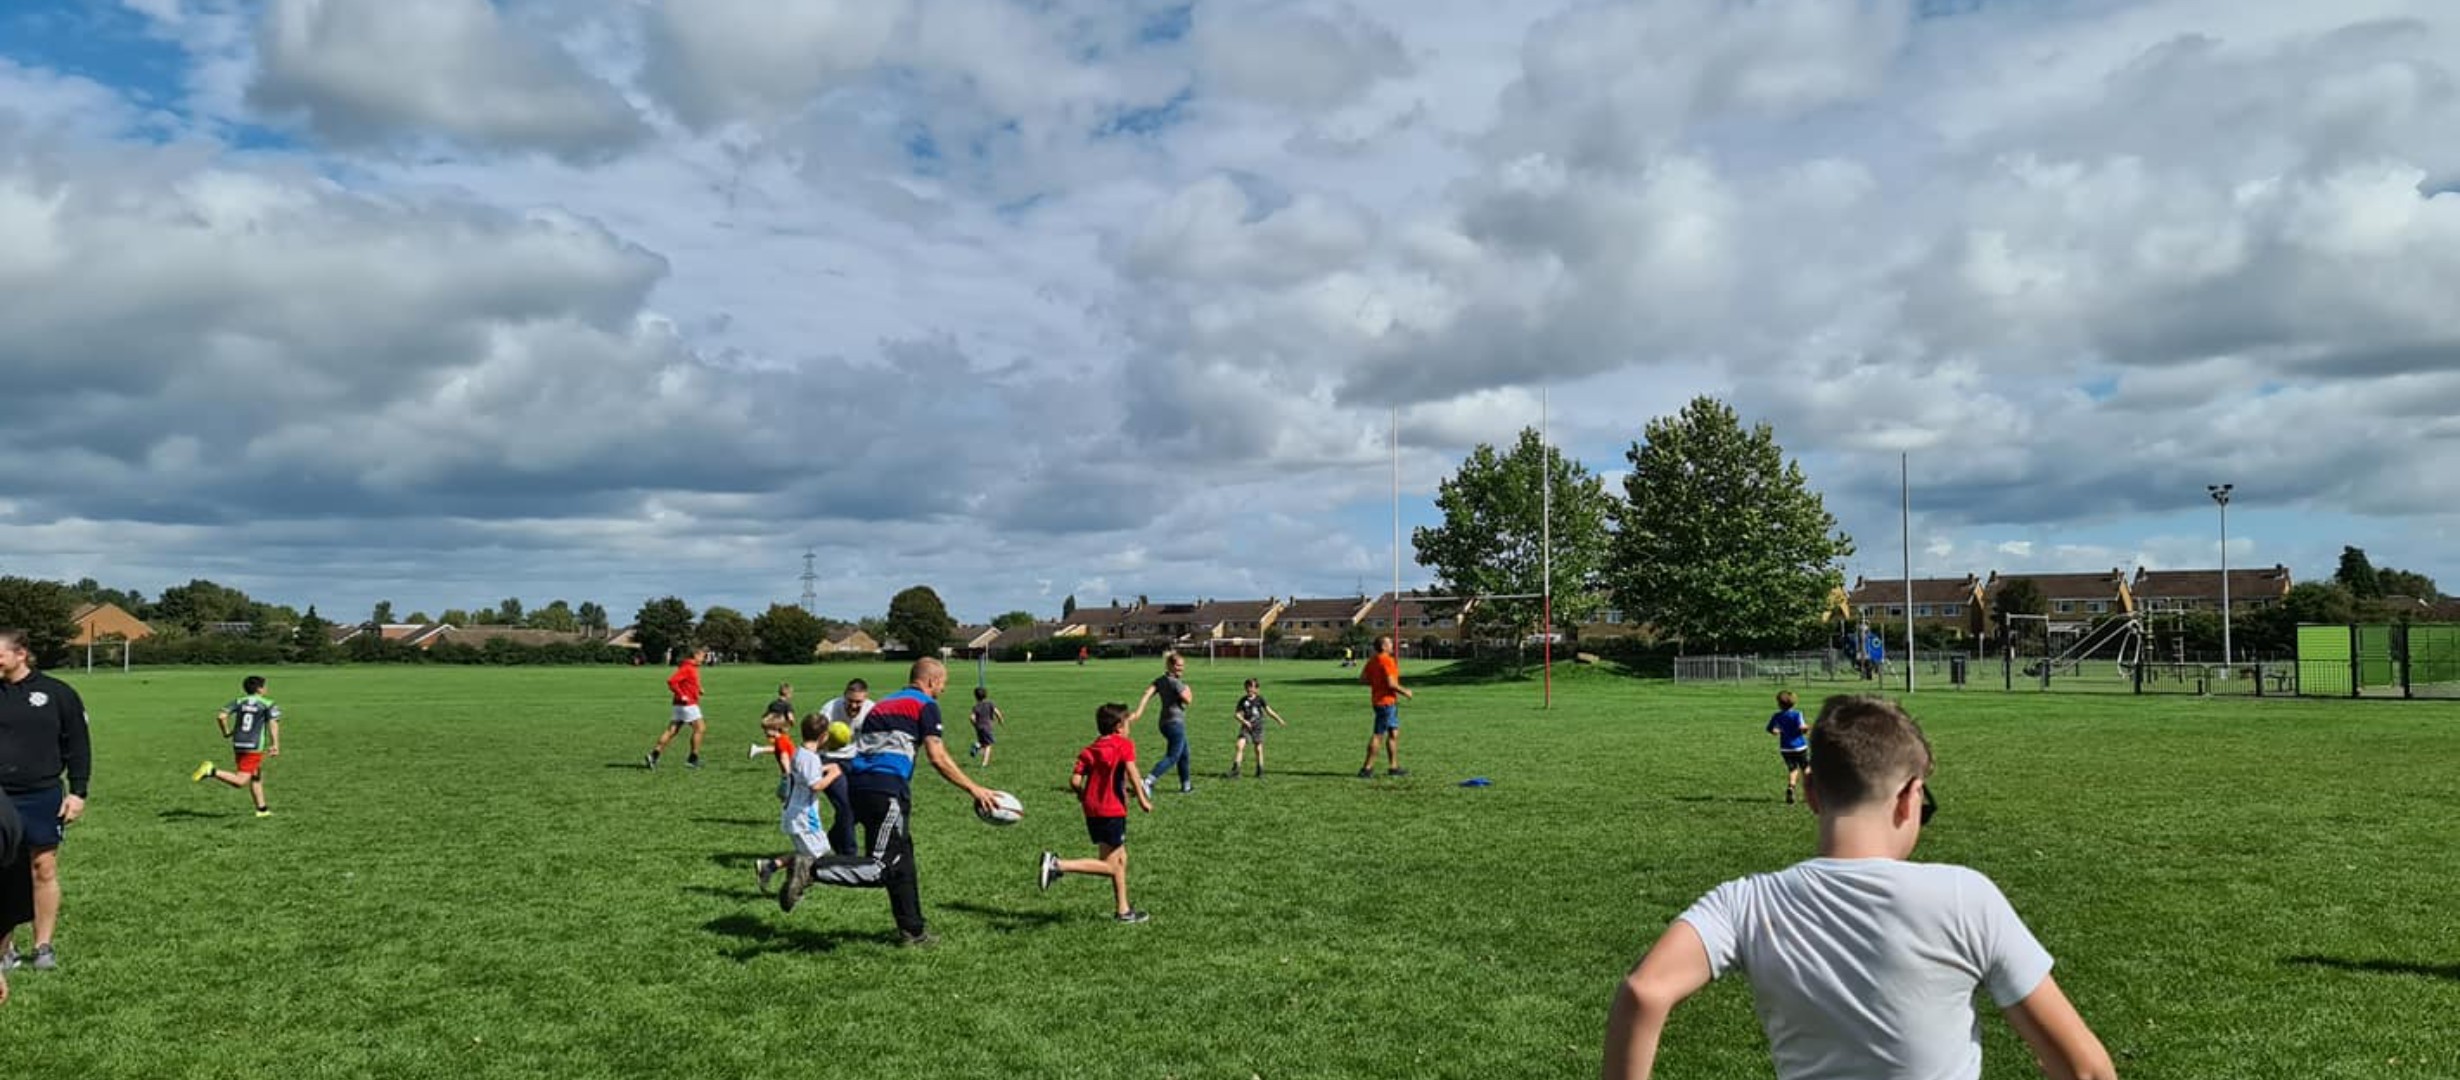 Example of tag style rugby game involving both children and parents